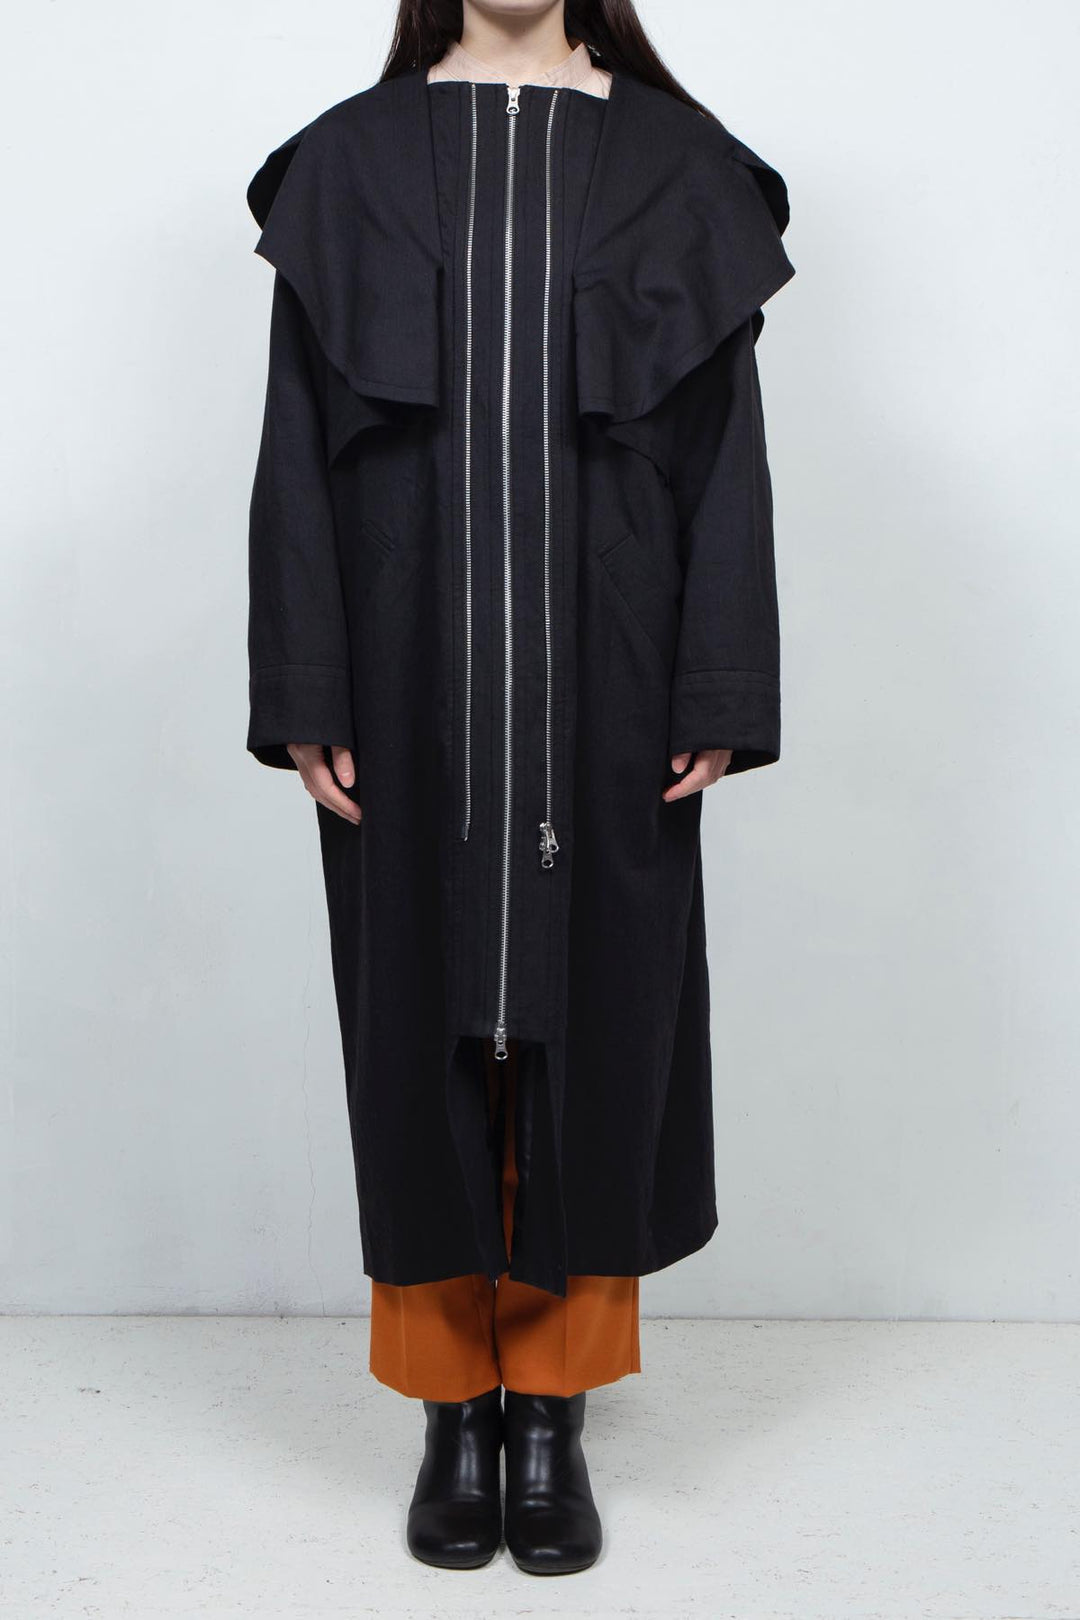 GHOST PARTY / linen & cotton layered coat Black